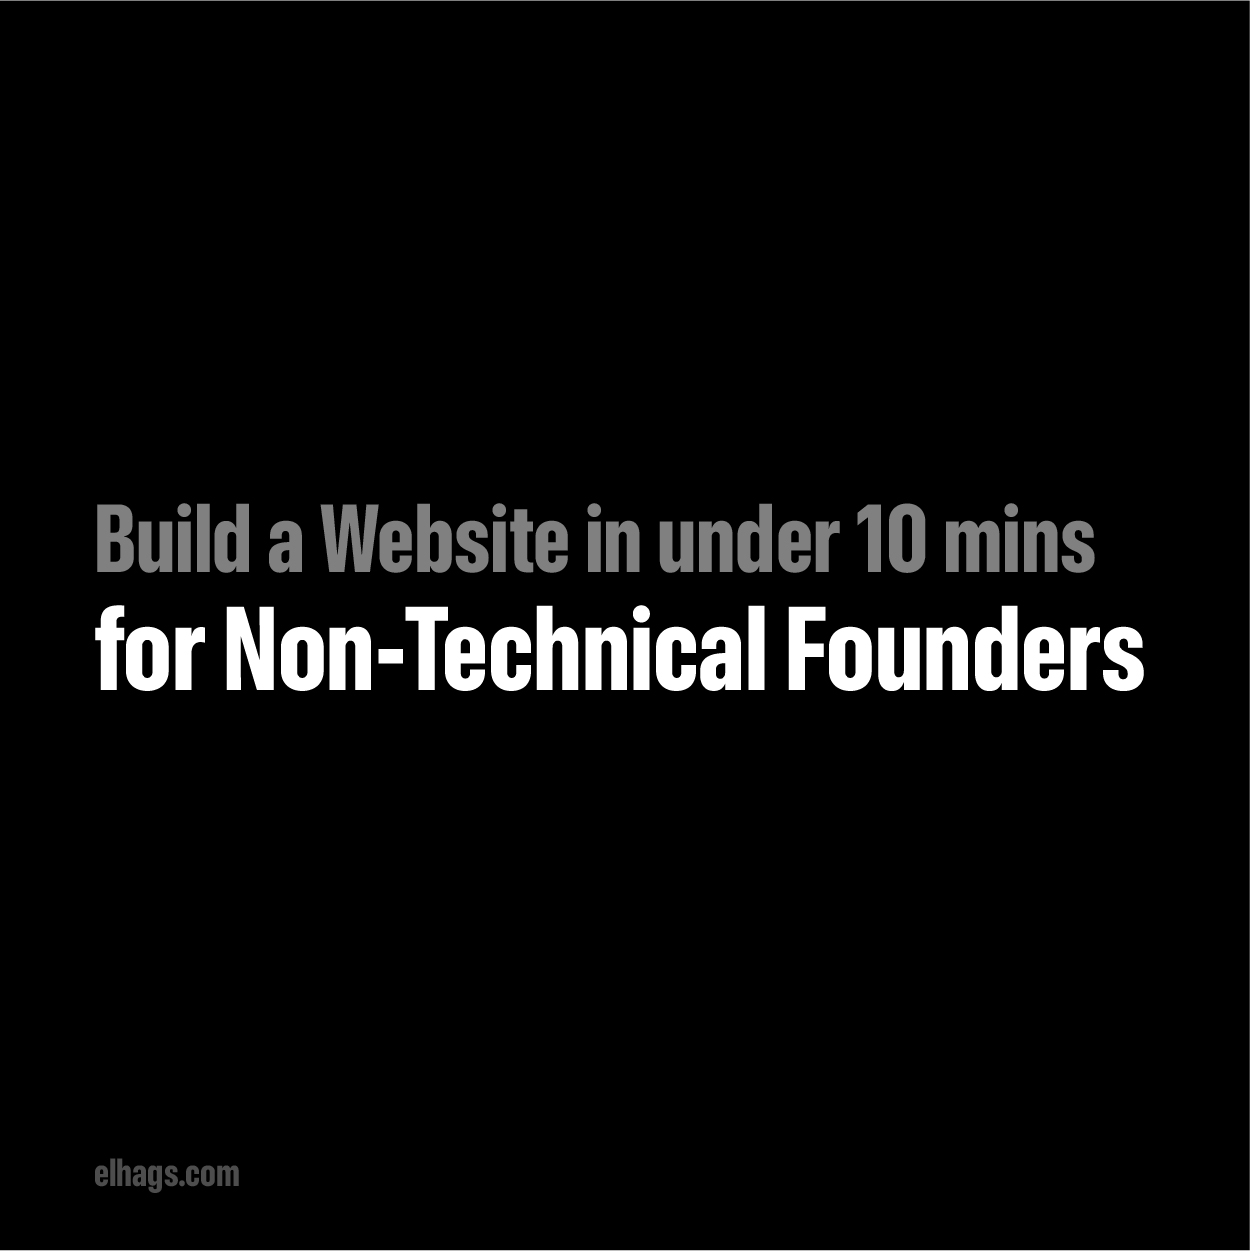 Build a Website in under 10 mins for Non-Technical Founders